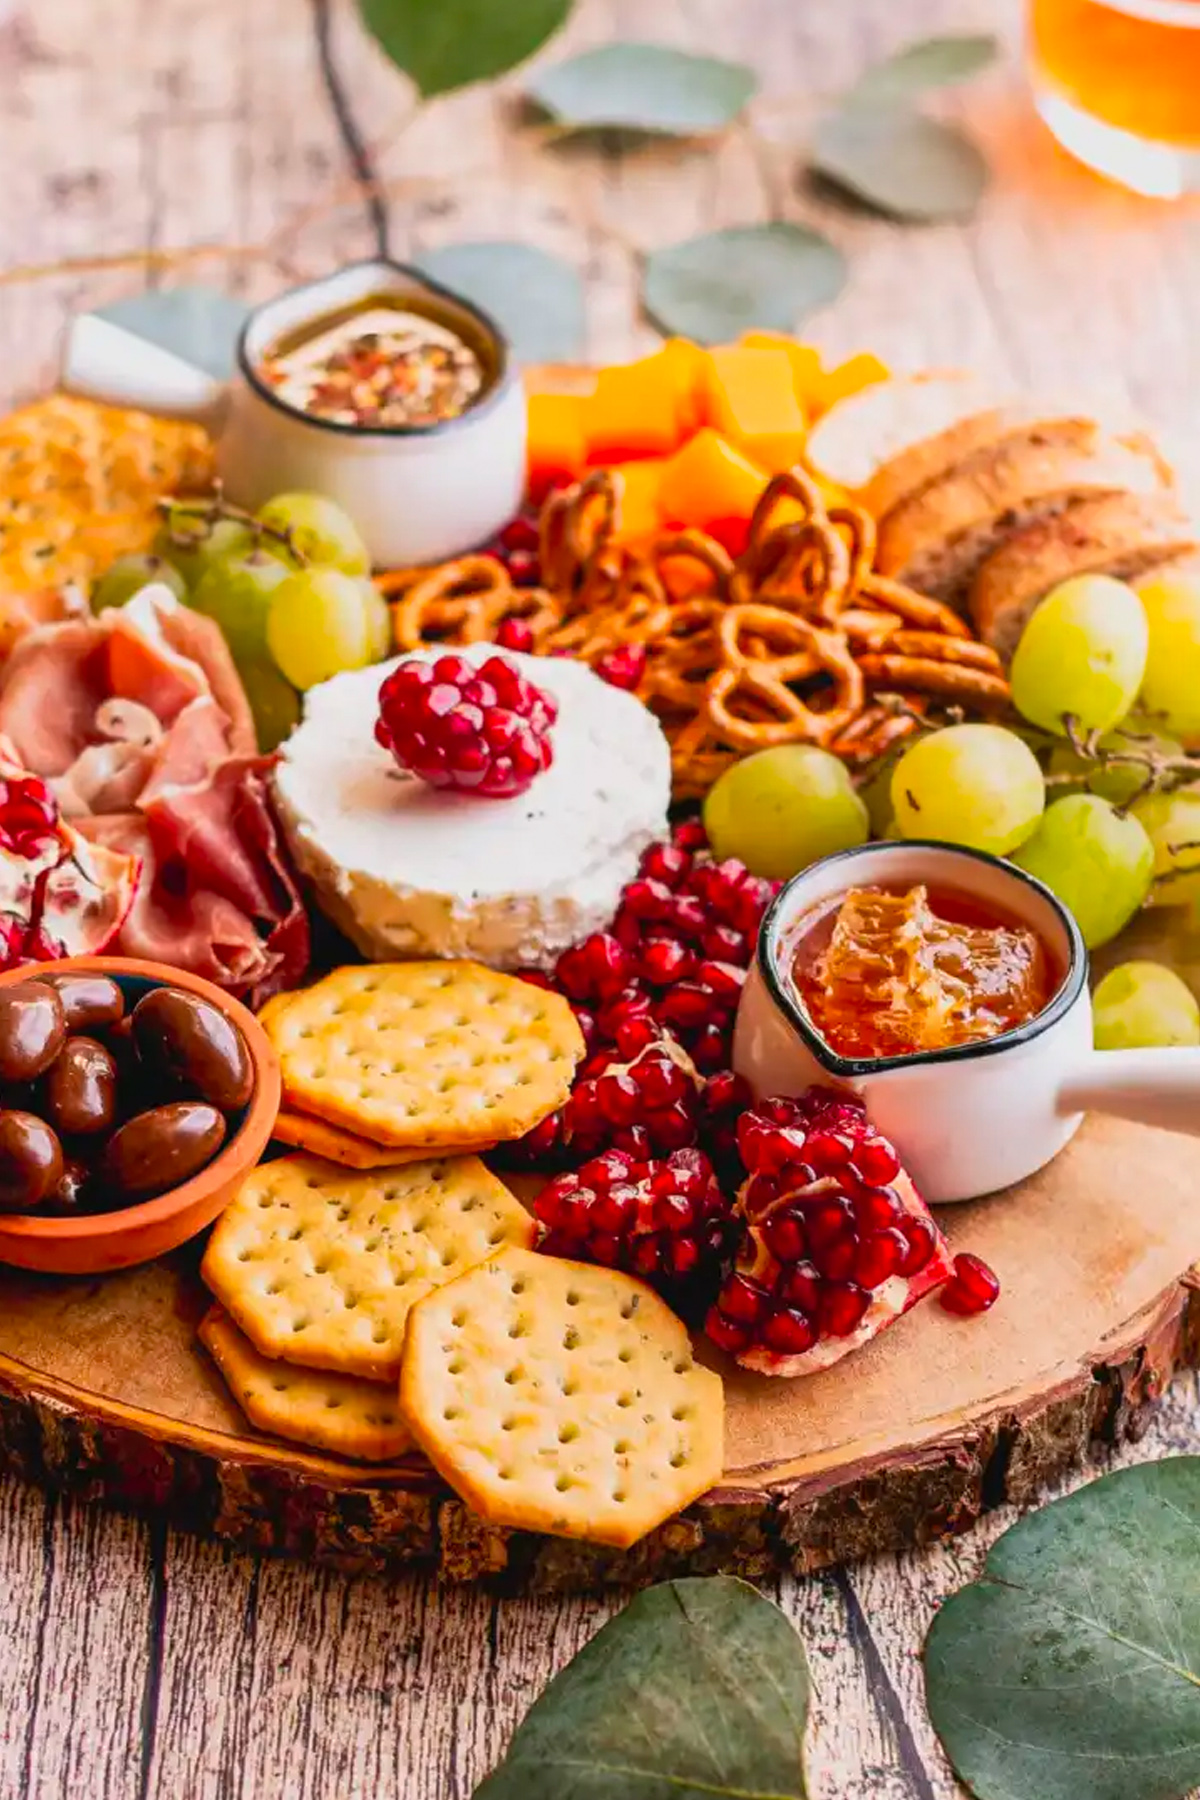 Sweet Tea and Thyme's board is filled with pomegranates, crackers, cheese, meat, grapes, and olives.